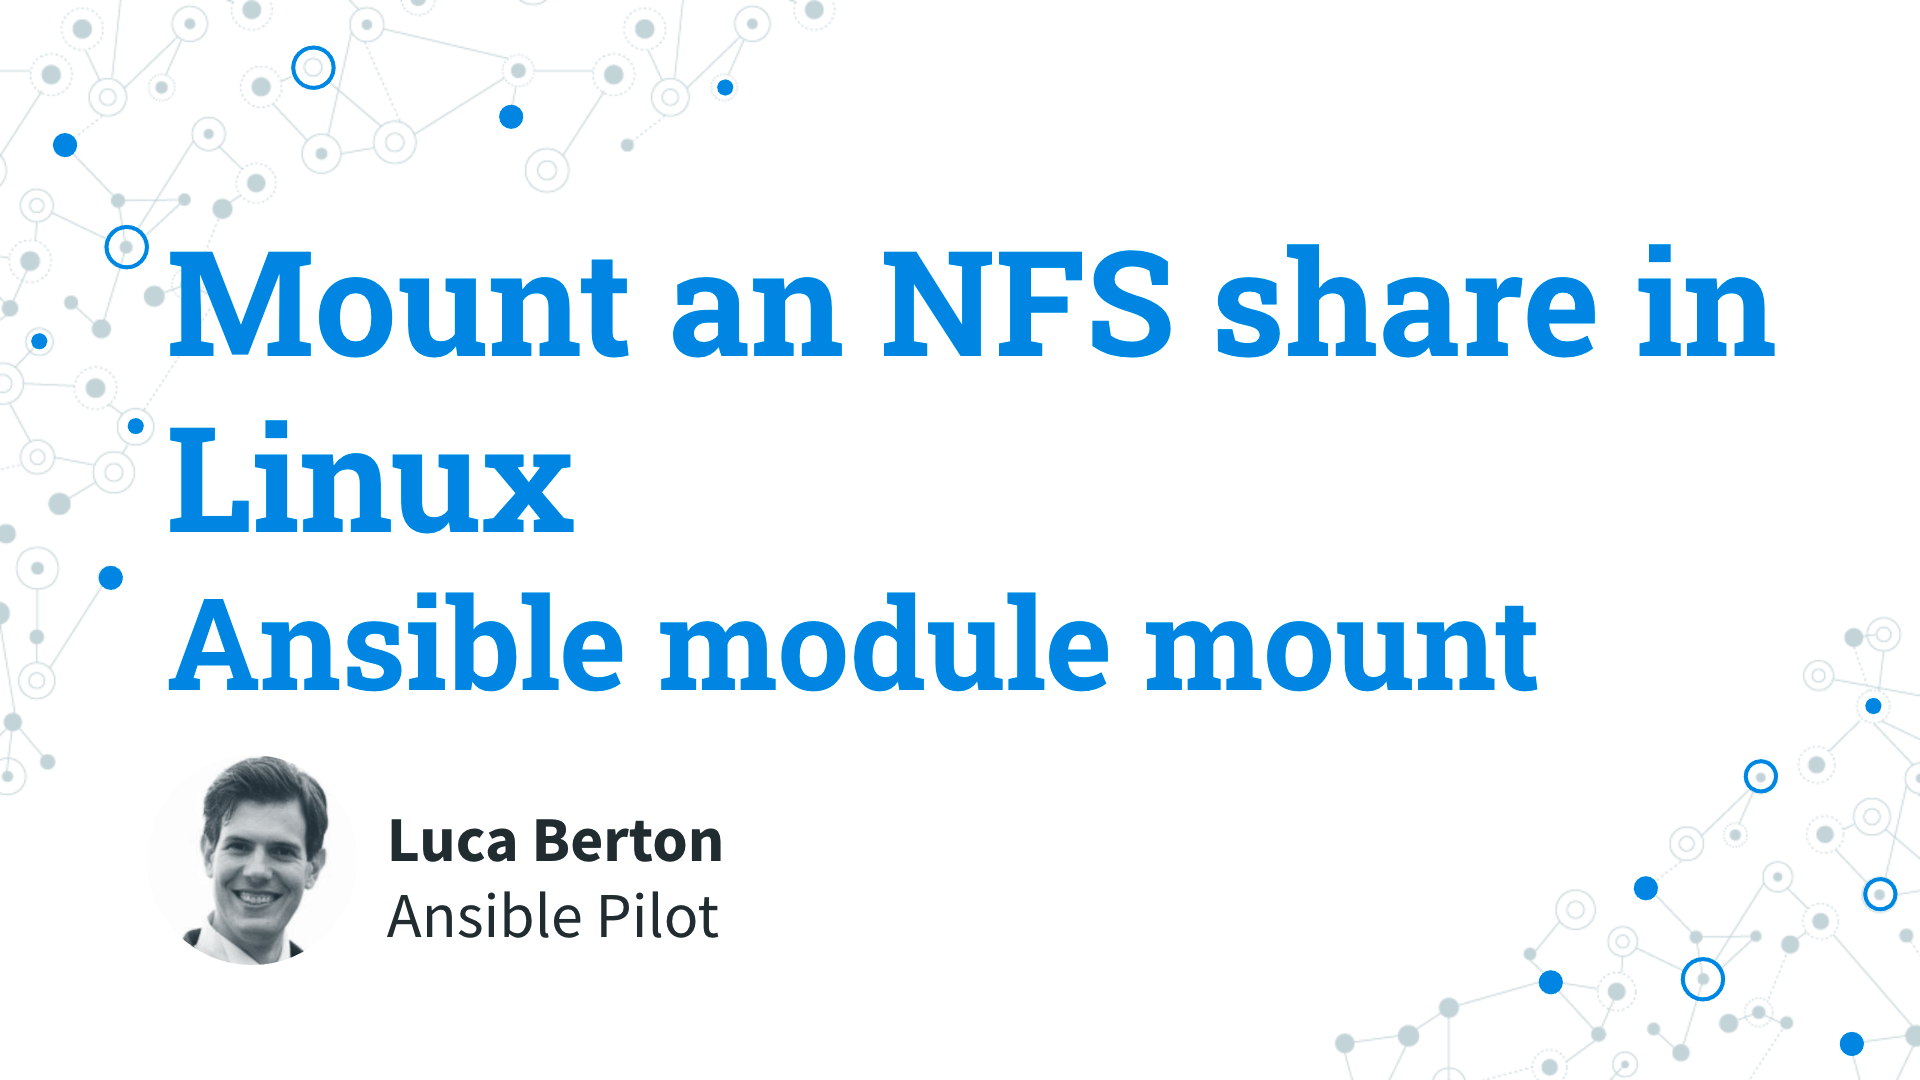 Mount an NFS share in Linux - Ansible module mount